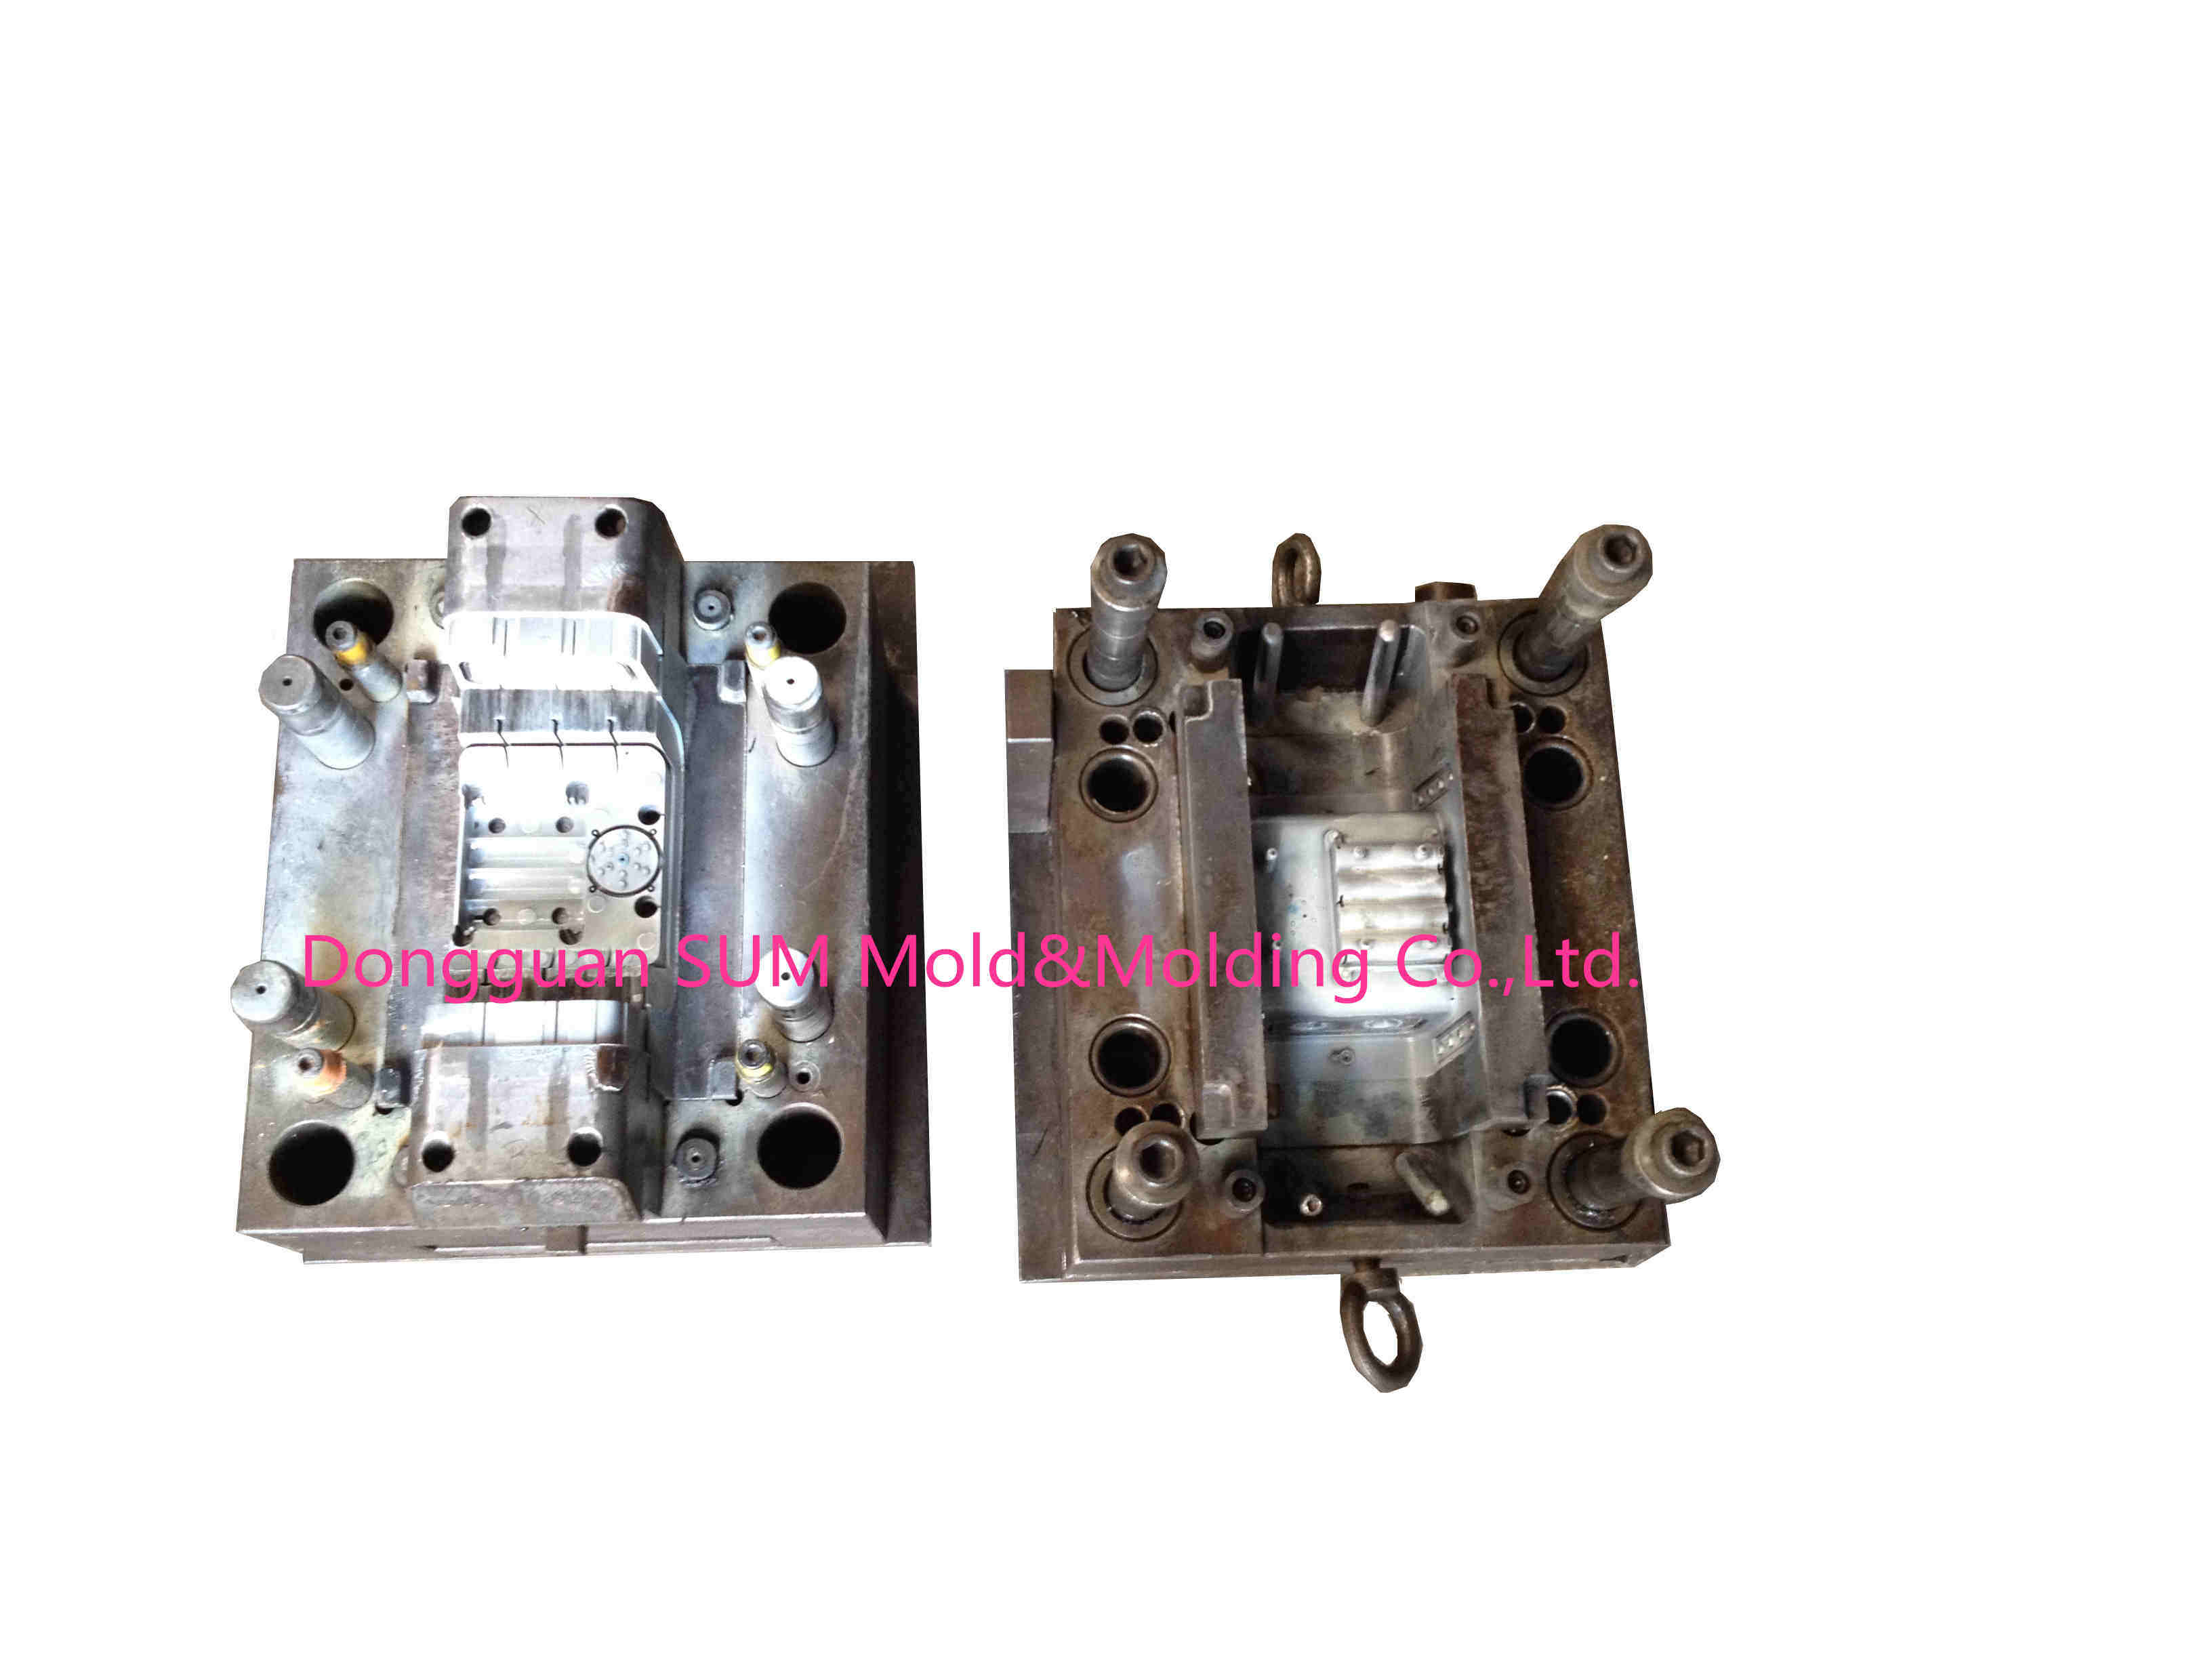 Injection Mold of Automotive Part 1 (AM-010)